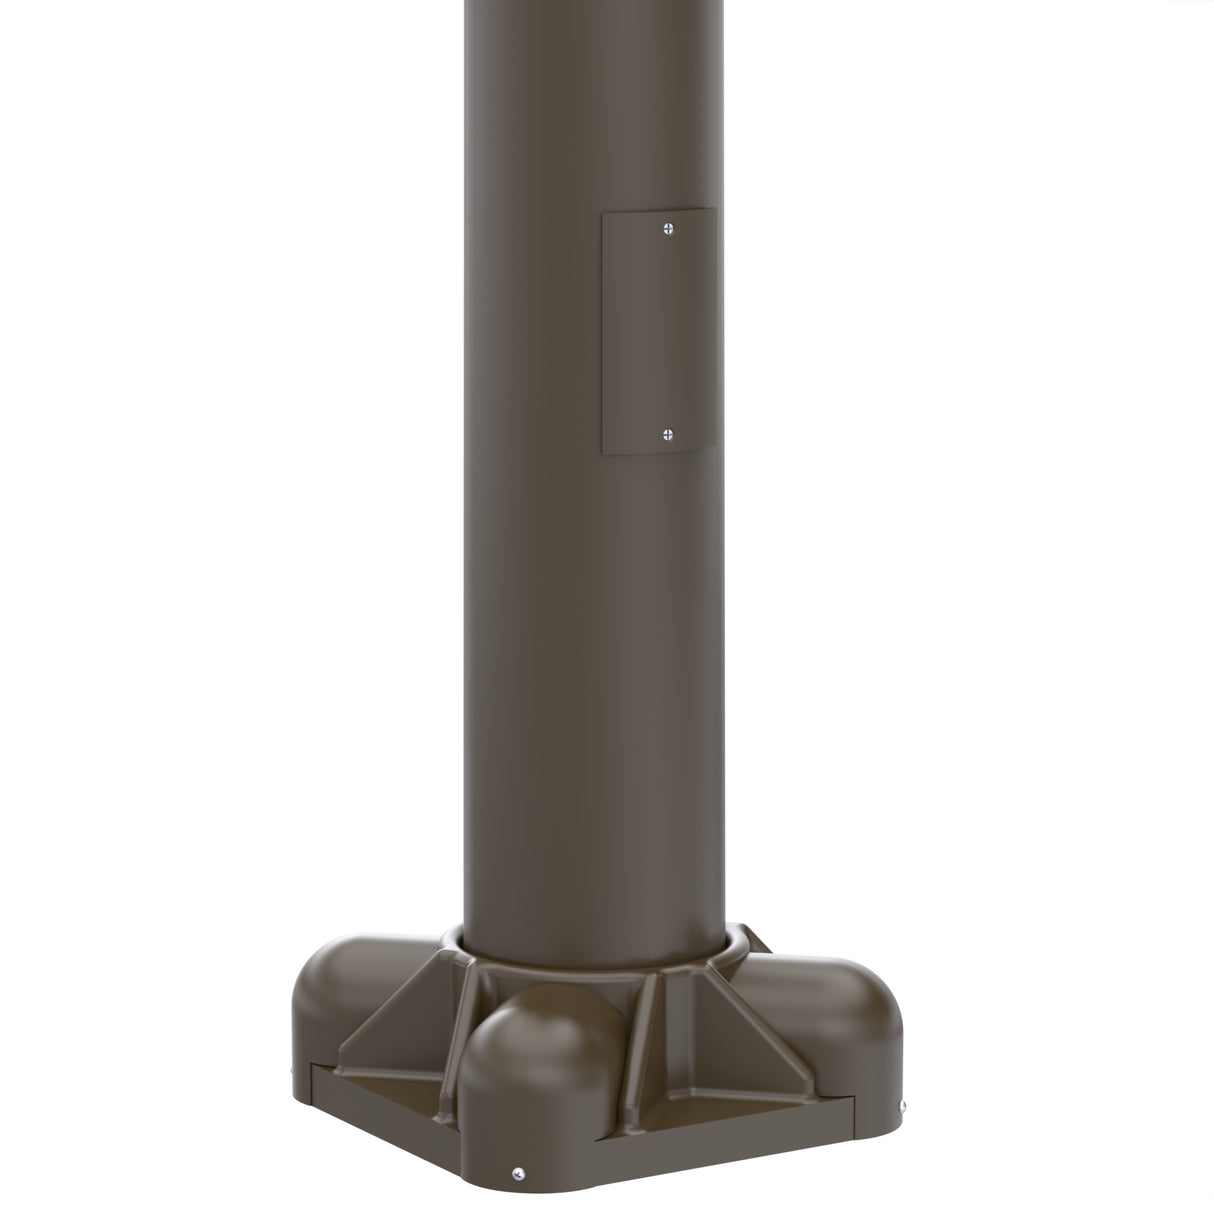 16' Tall x 5.0" Base OD x 3.0" Top OD x 0.125" Thick, Round Tapered Aluminum, Anchor Base Light Pole